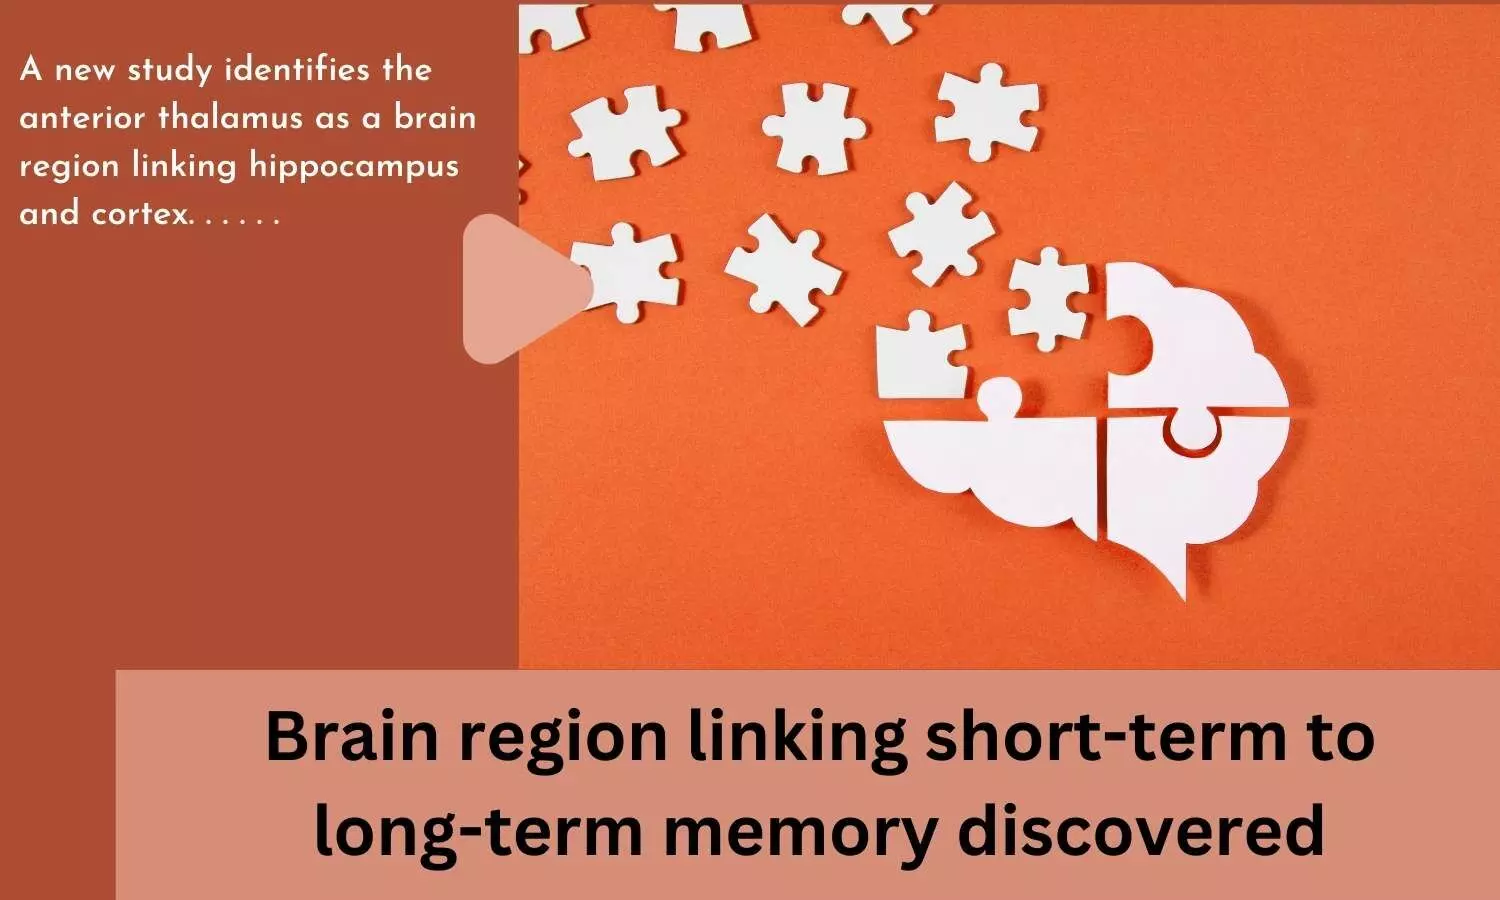 Brain region linking short-term to long-term memory discovered